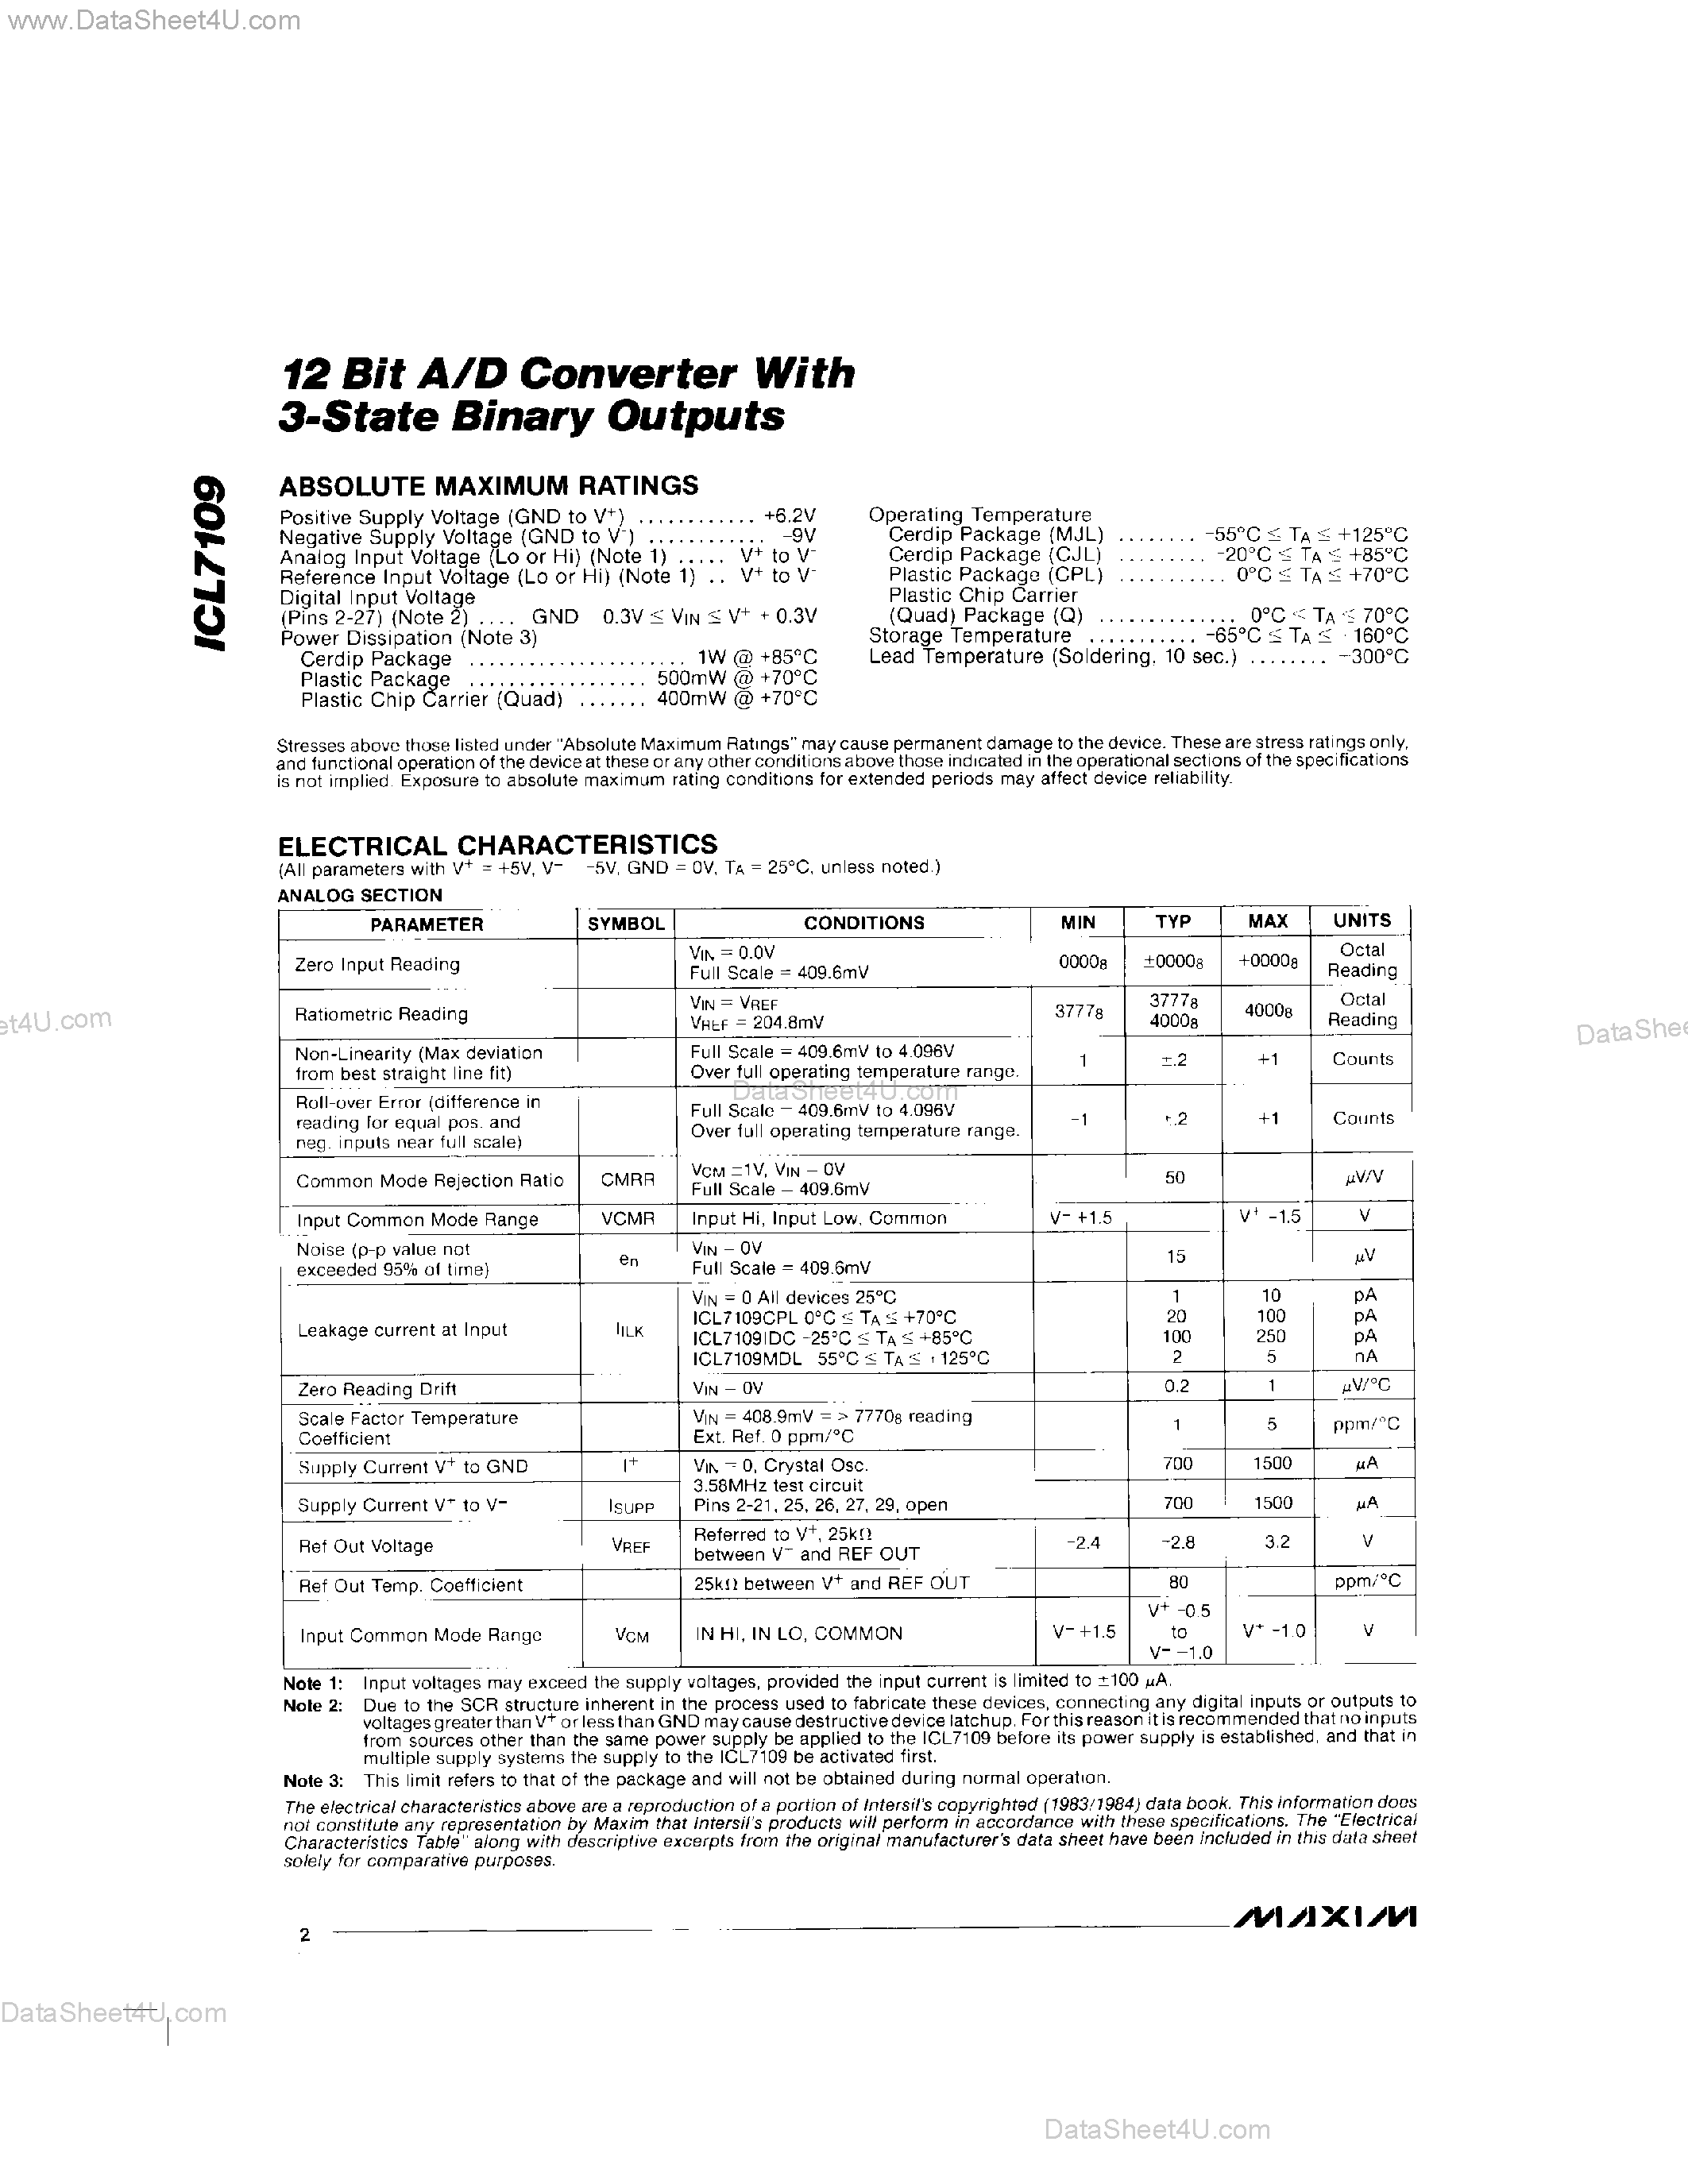 Datasheet ICL7109C/D - 12 Bit A/D Converter With 3-State Binary Outputs page 2